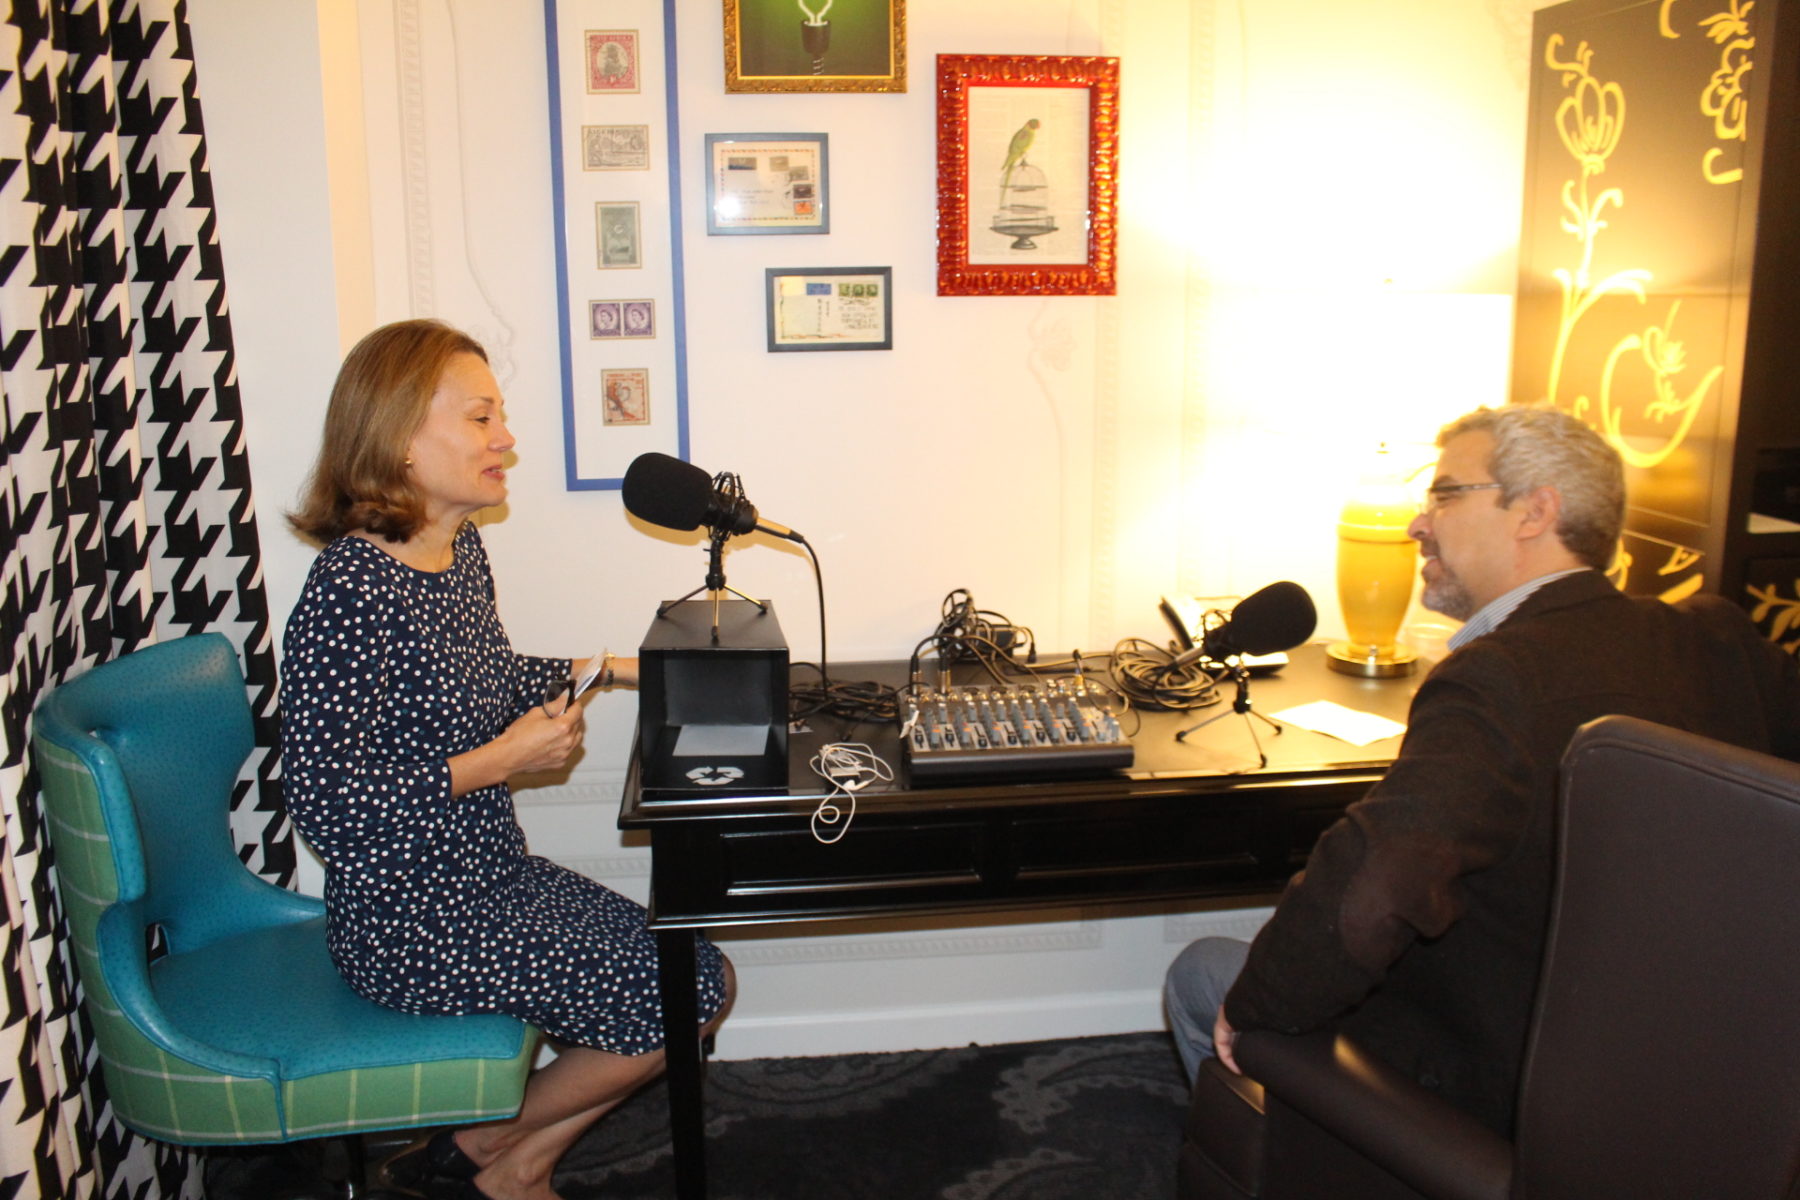 October 20- Julianne Smith interviews Mork Hauser, Director of News and Information, Robert Morris University, for the Brussels Sprouts Podcast.